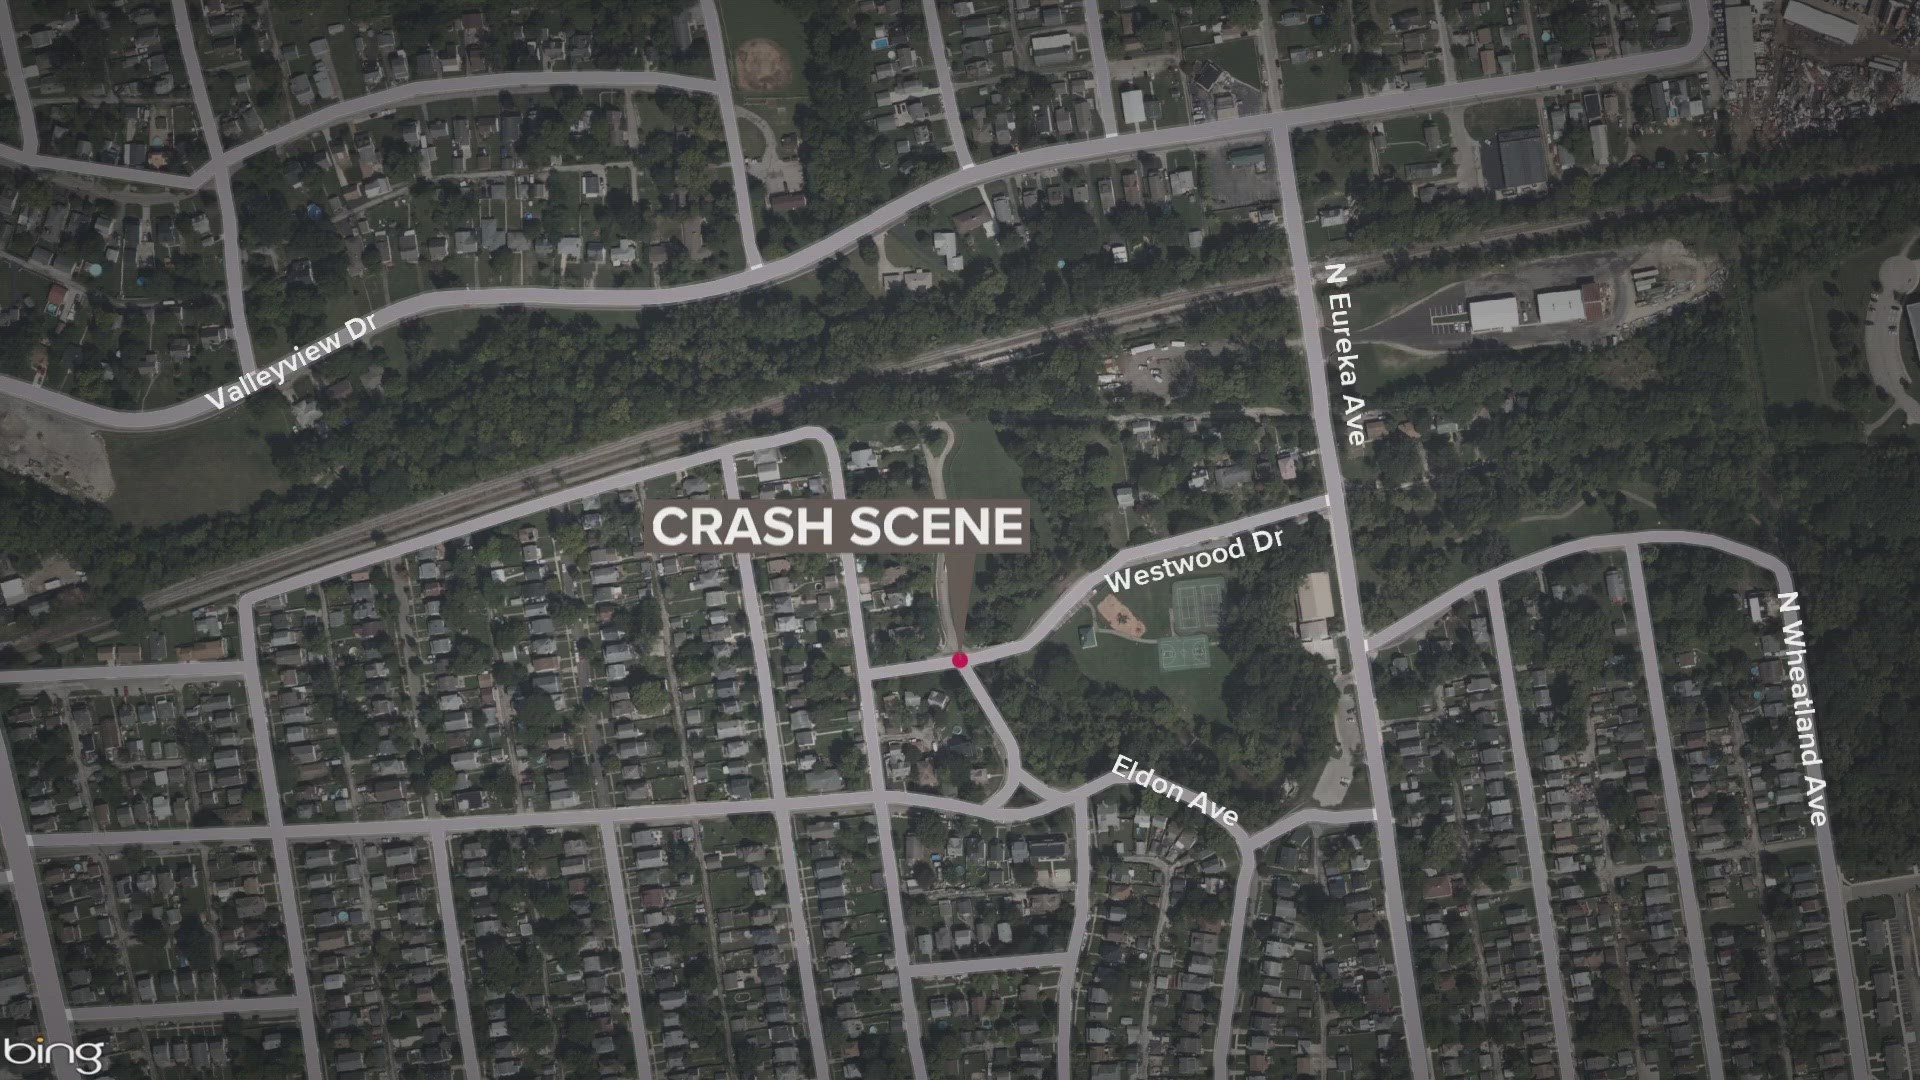 The crash happened on Westwood Drive, just east of Eldon Avenue, shortly after 8:30 p.m. on Saturday.